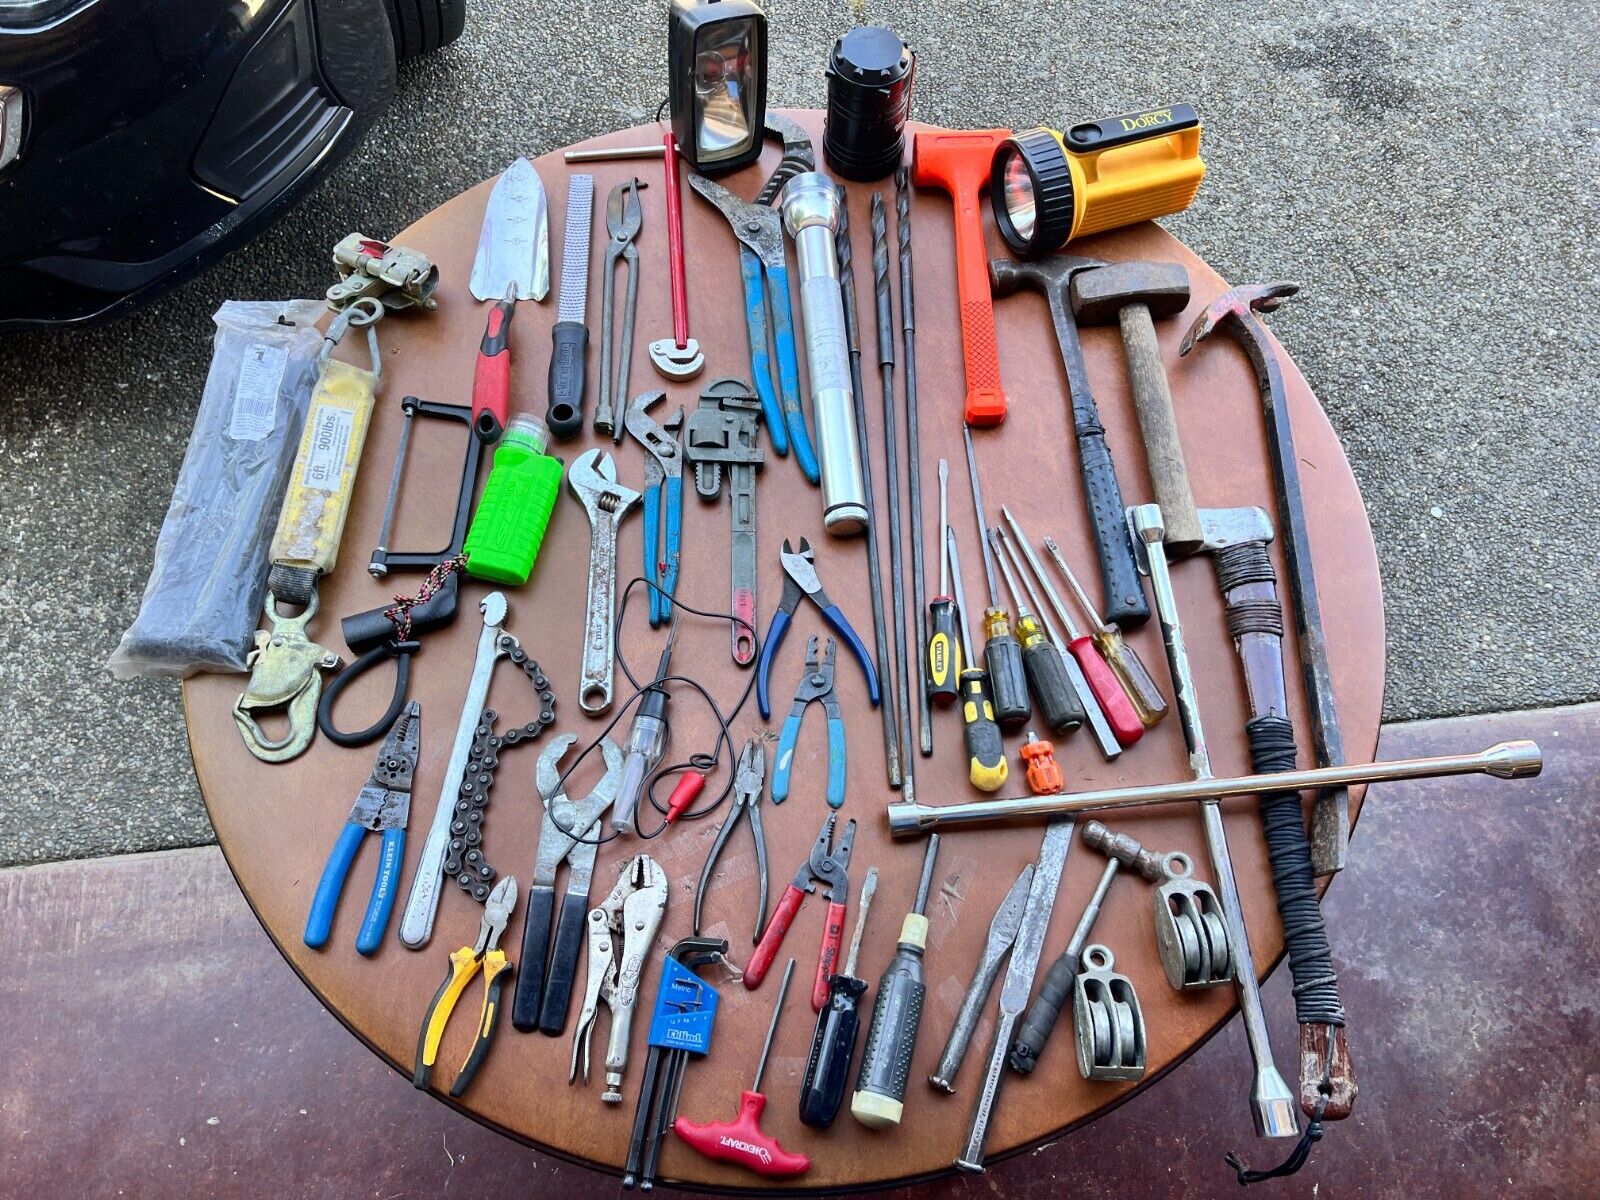 Mixed Lot of Hand Tools Pliers Wrenches Screwdrivers Hammer Axe Saw Flashlights